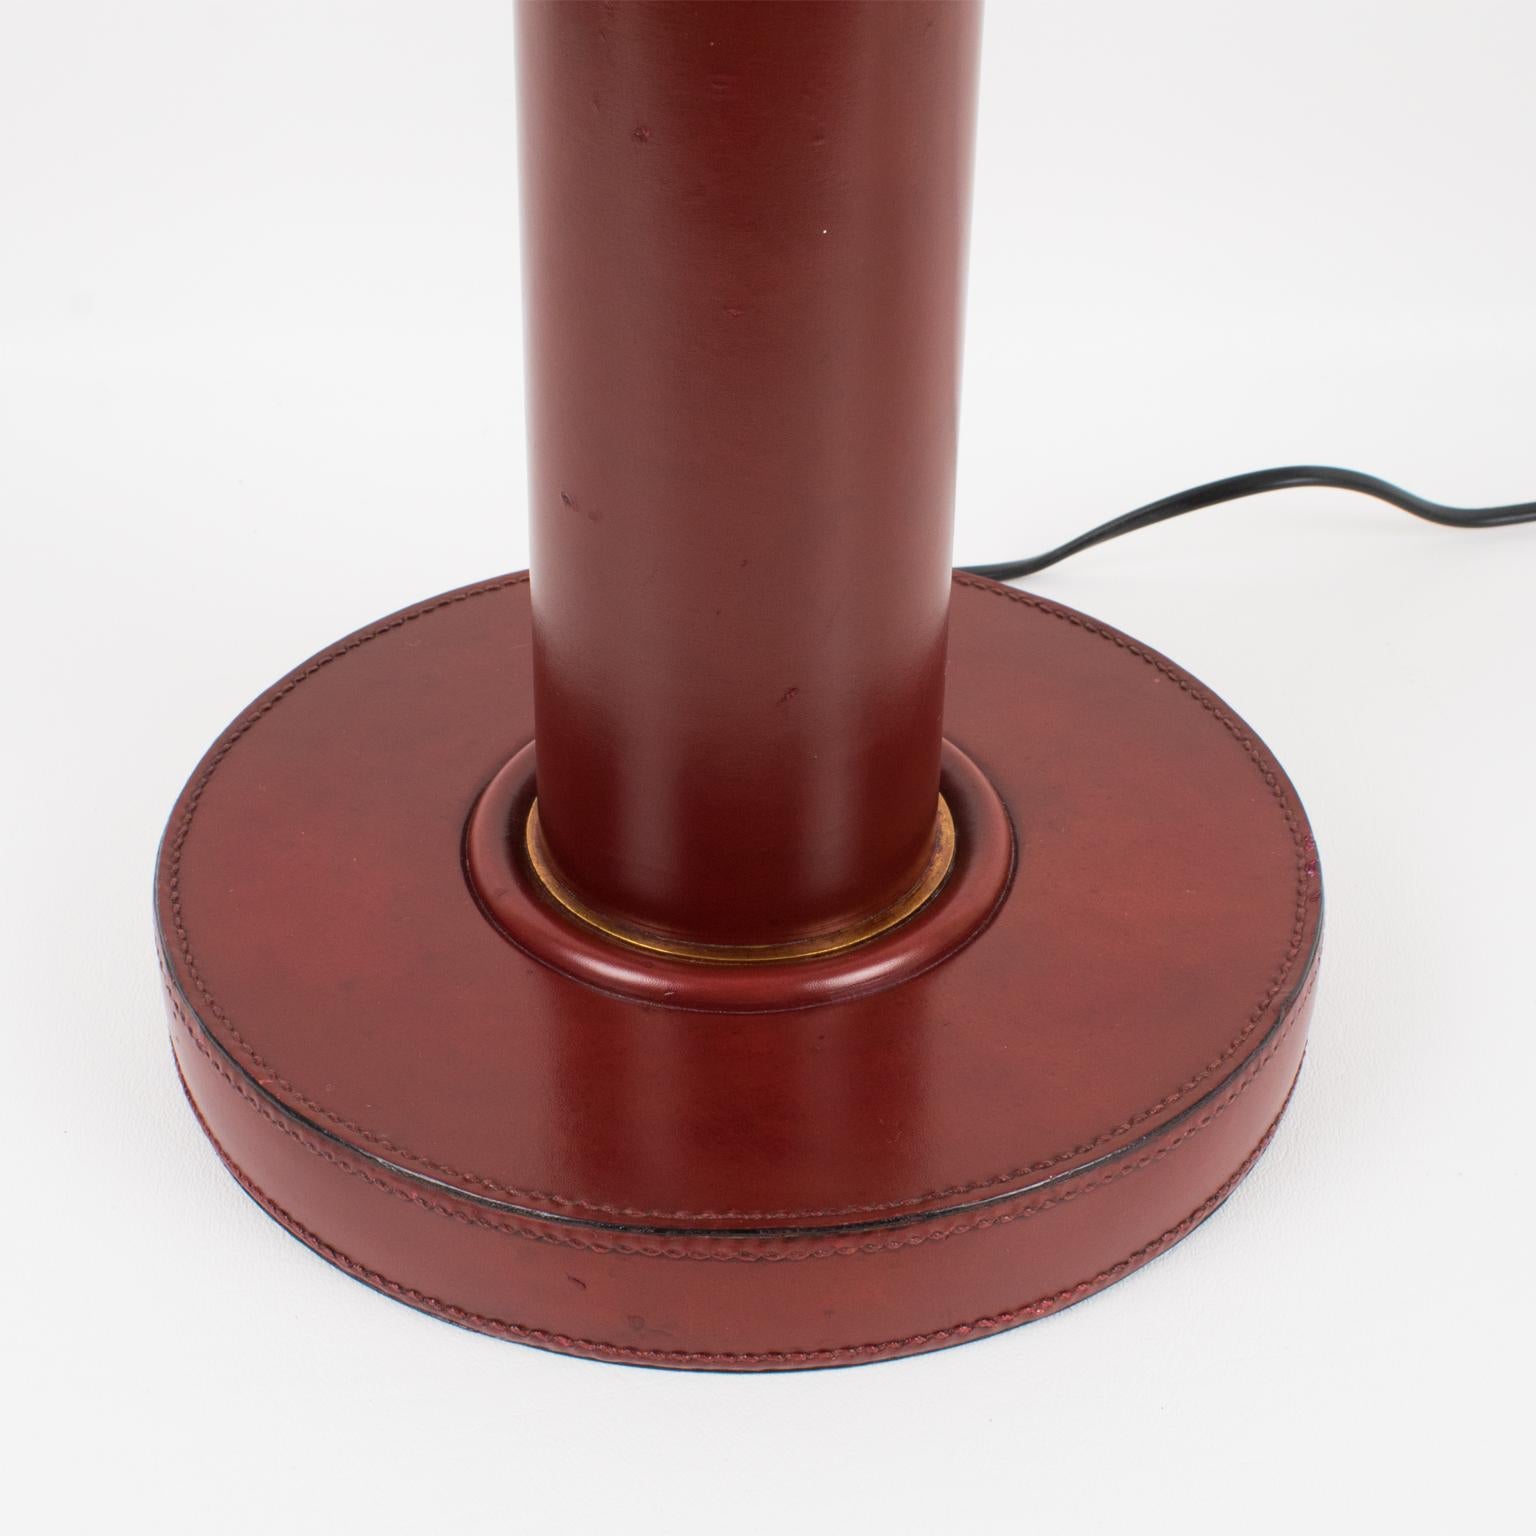 Paul Dupre Lafon 1950s French Art Deco Hand-Stitched Red Leather Table Lamp 6